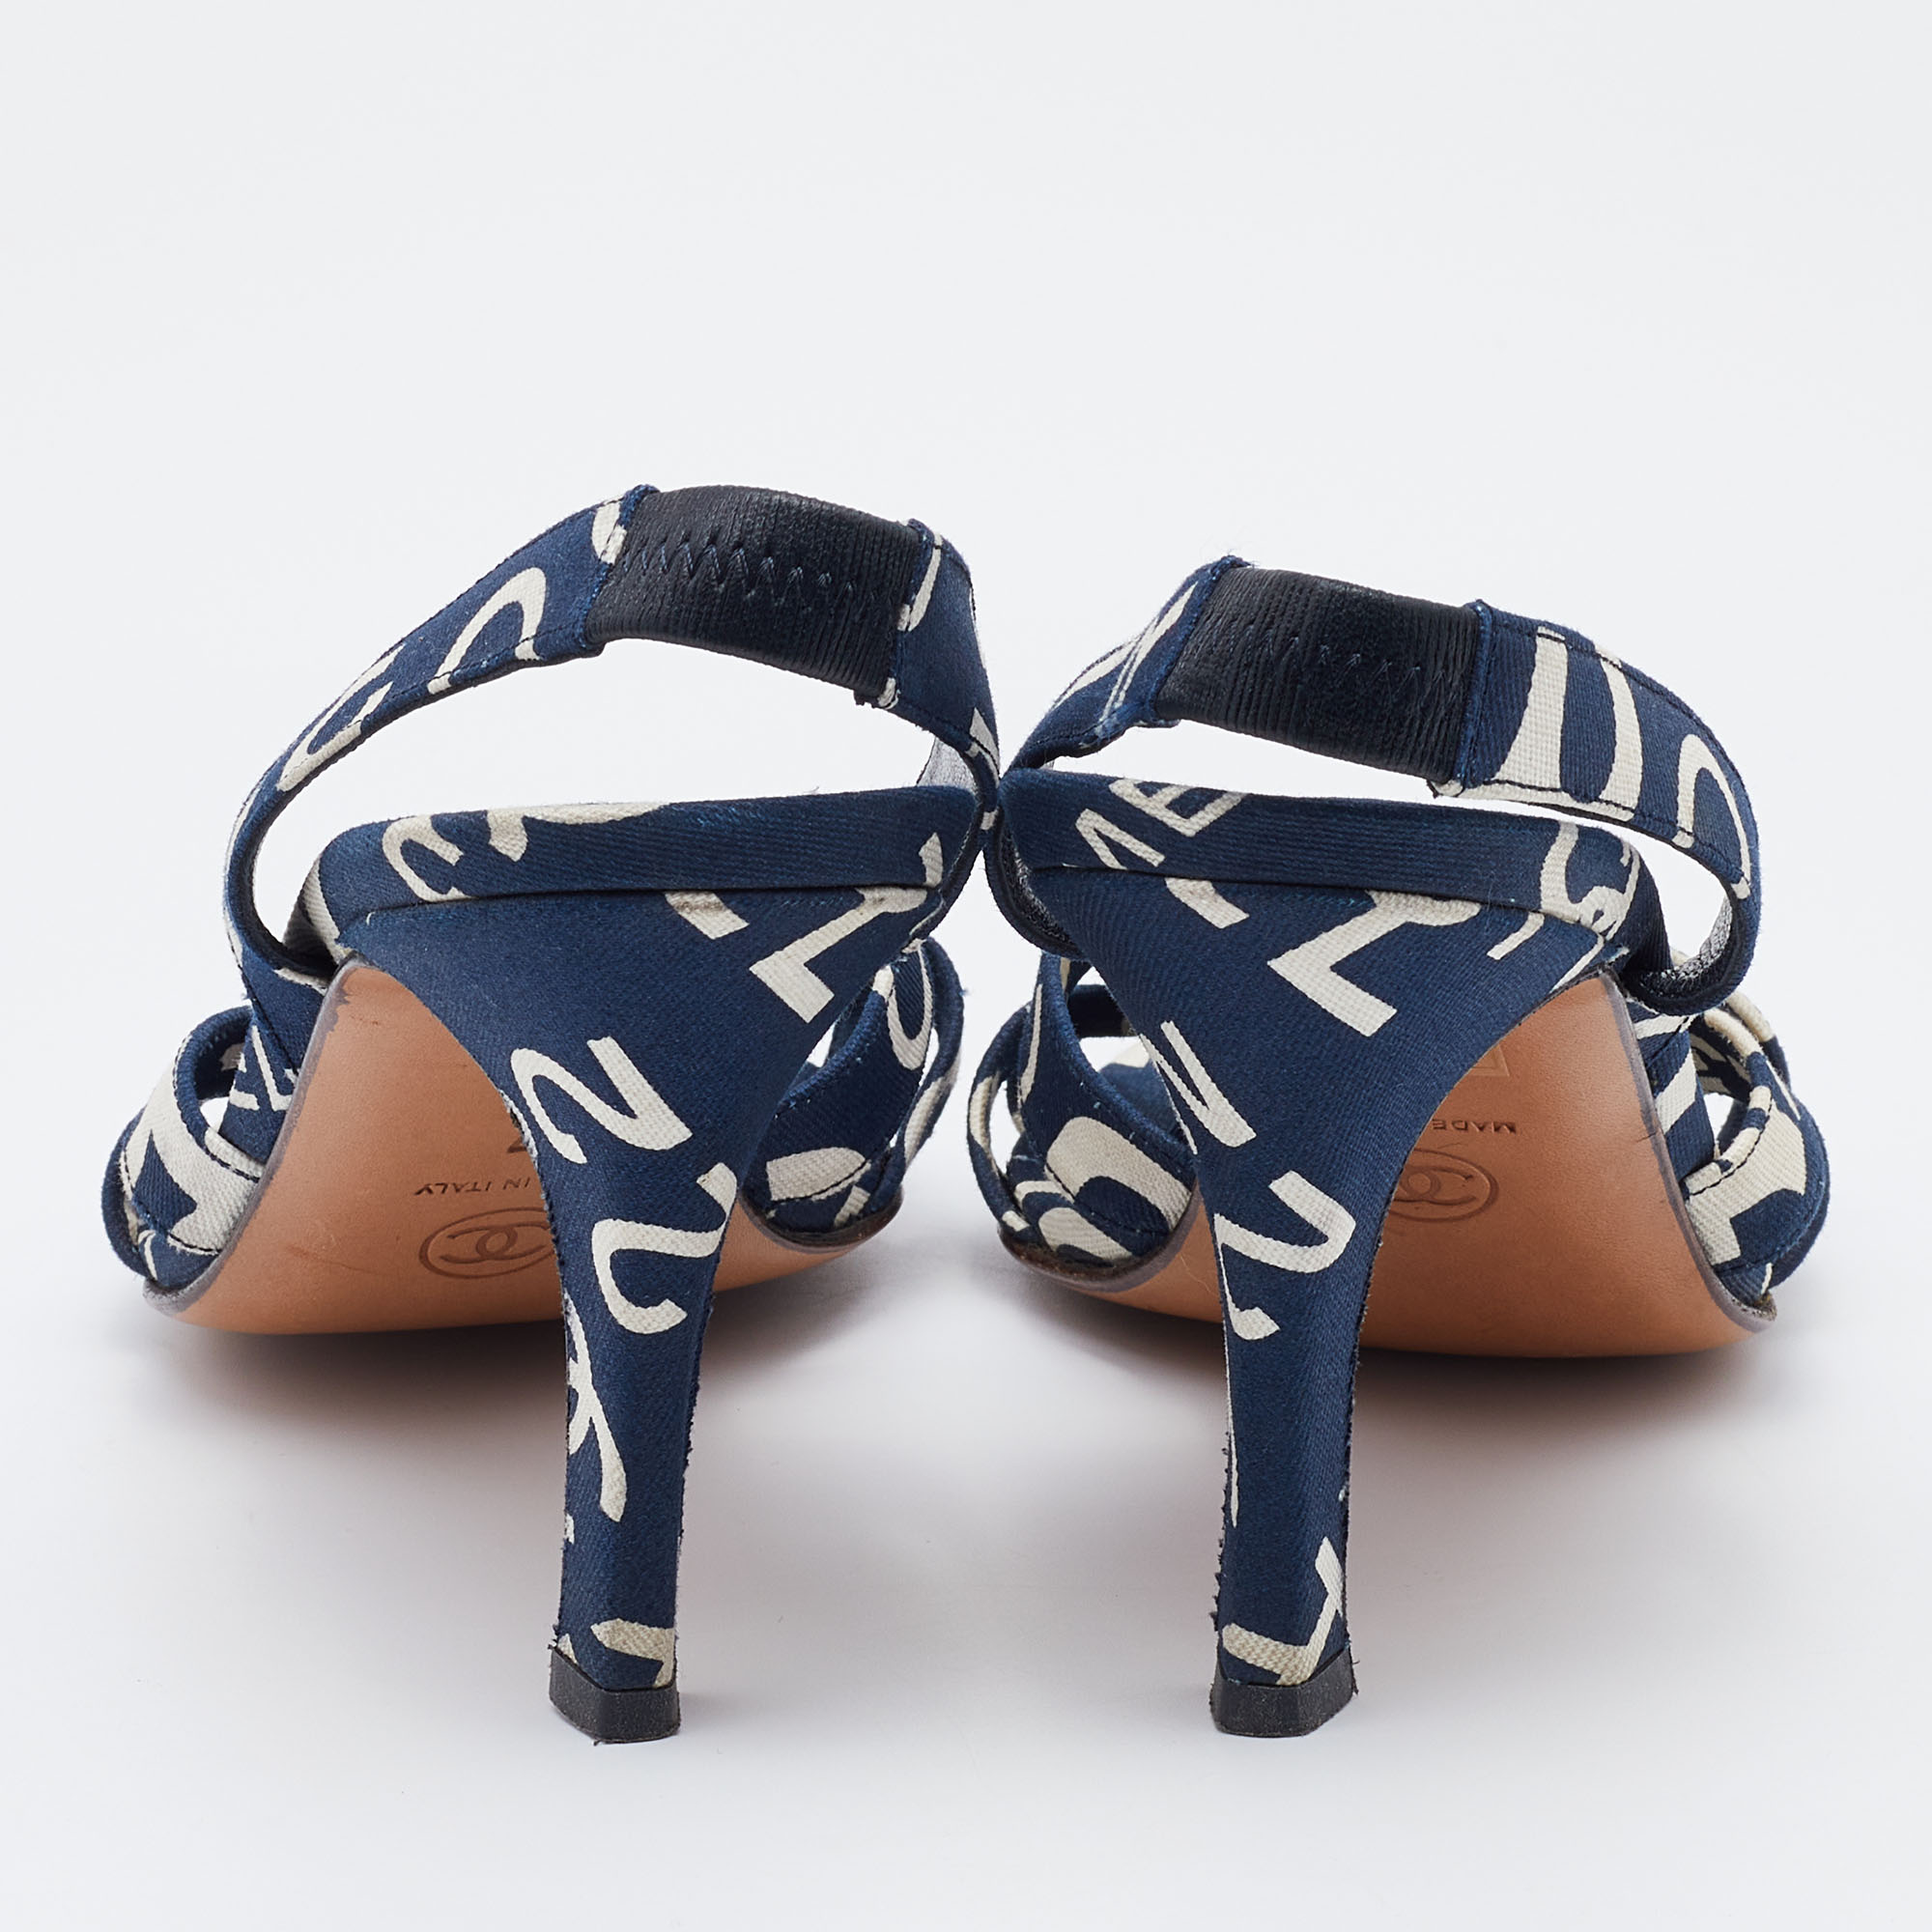 Chanel Blue/White Printed Canvas Slingback Sandals Size 37